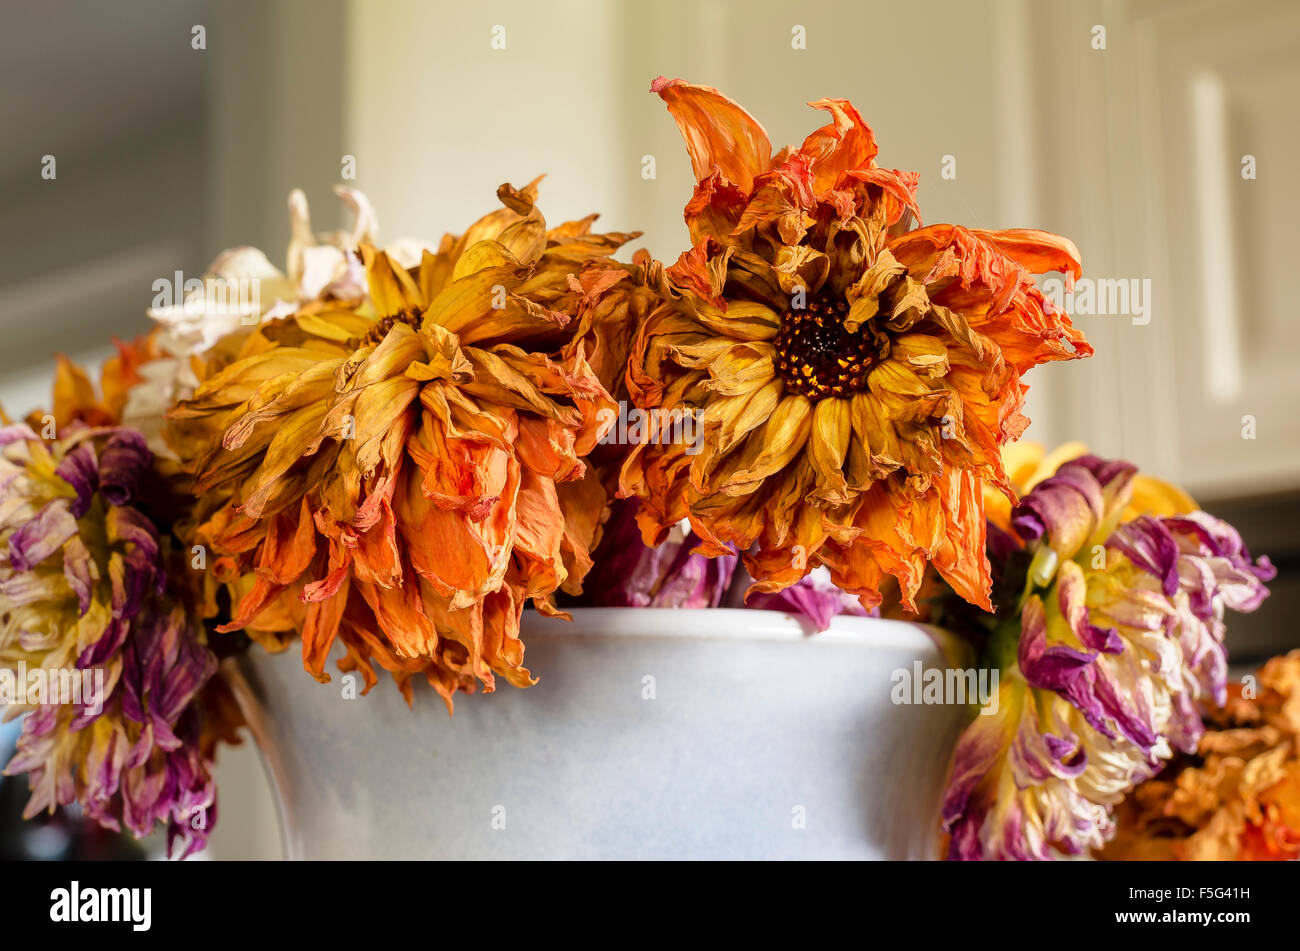 Tired old dahlia flowers take on a beauty of their own and continue to grace a table Stock Photo